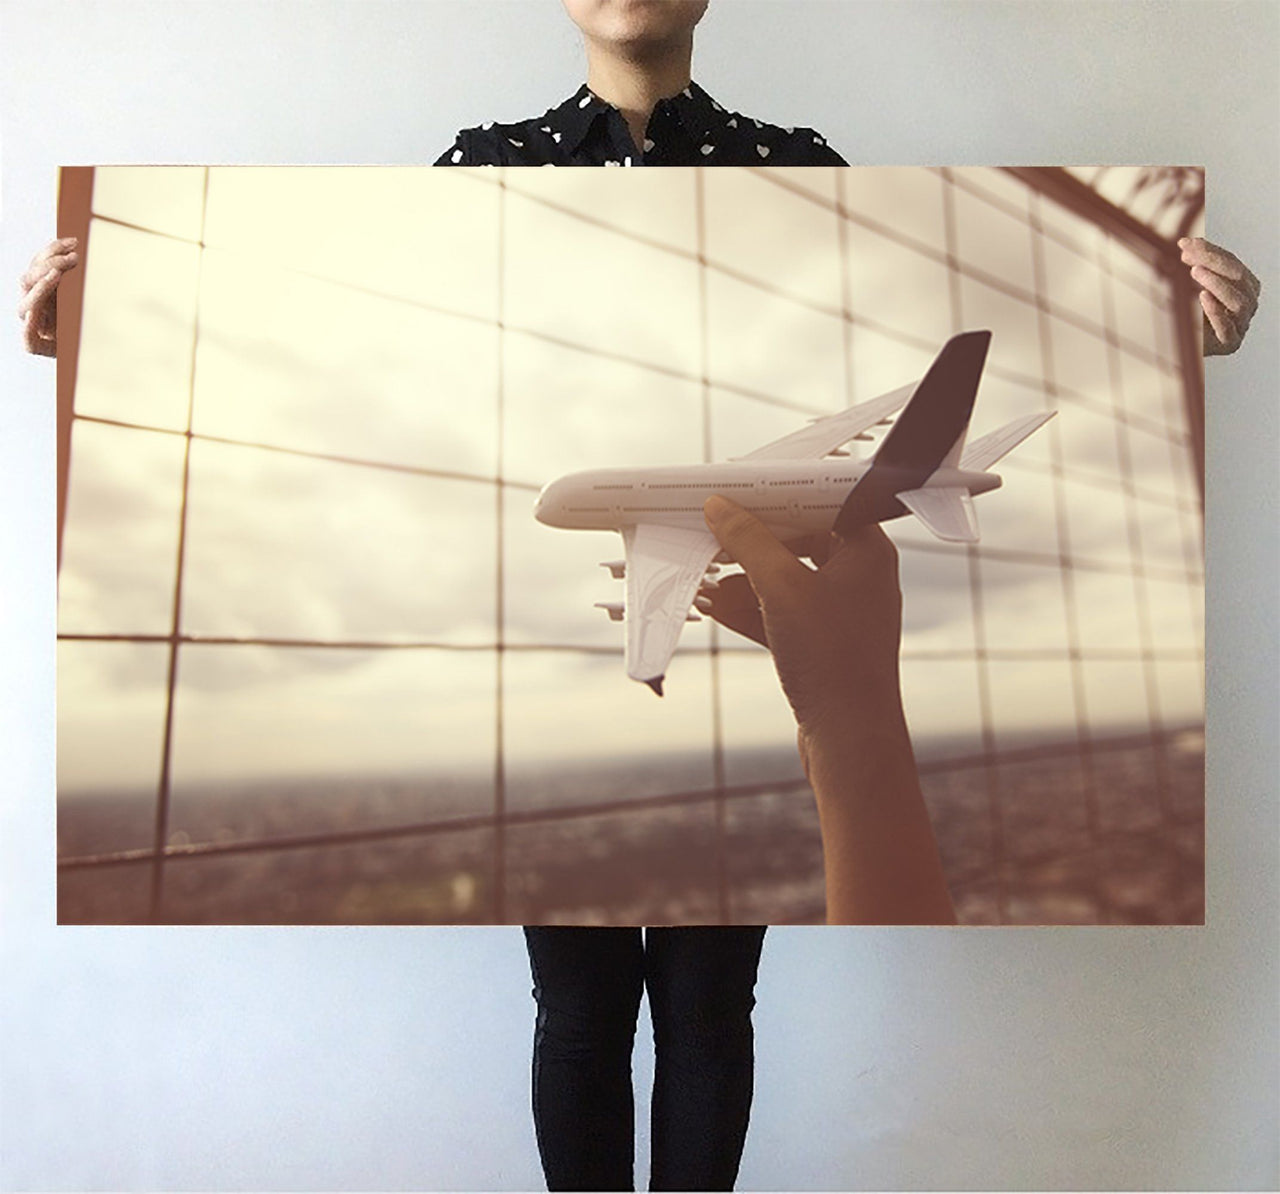 Follow Your Dreams Printed Posters Aviation Shop 